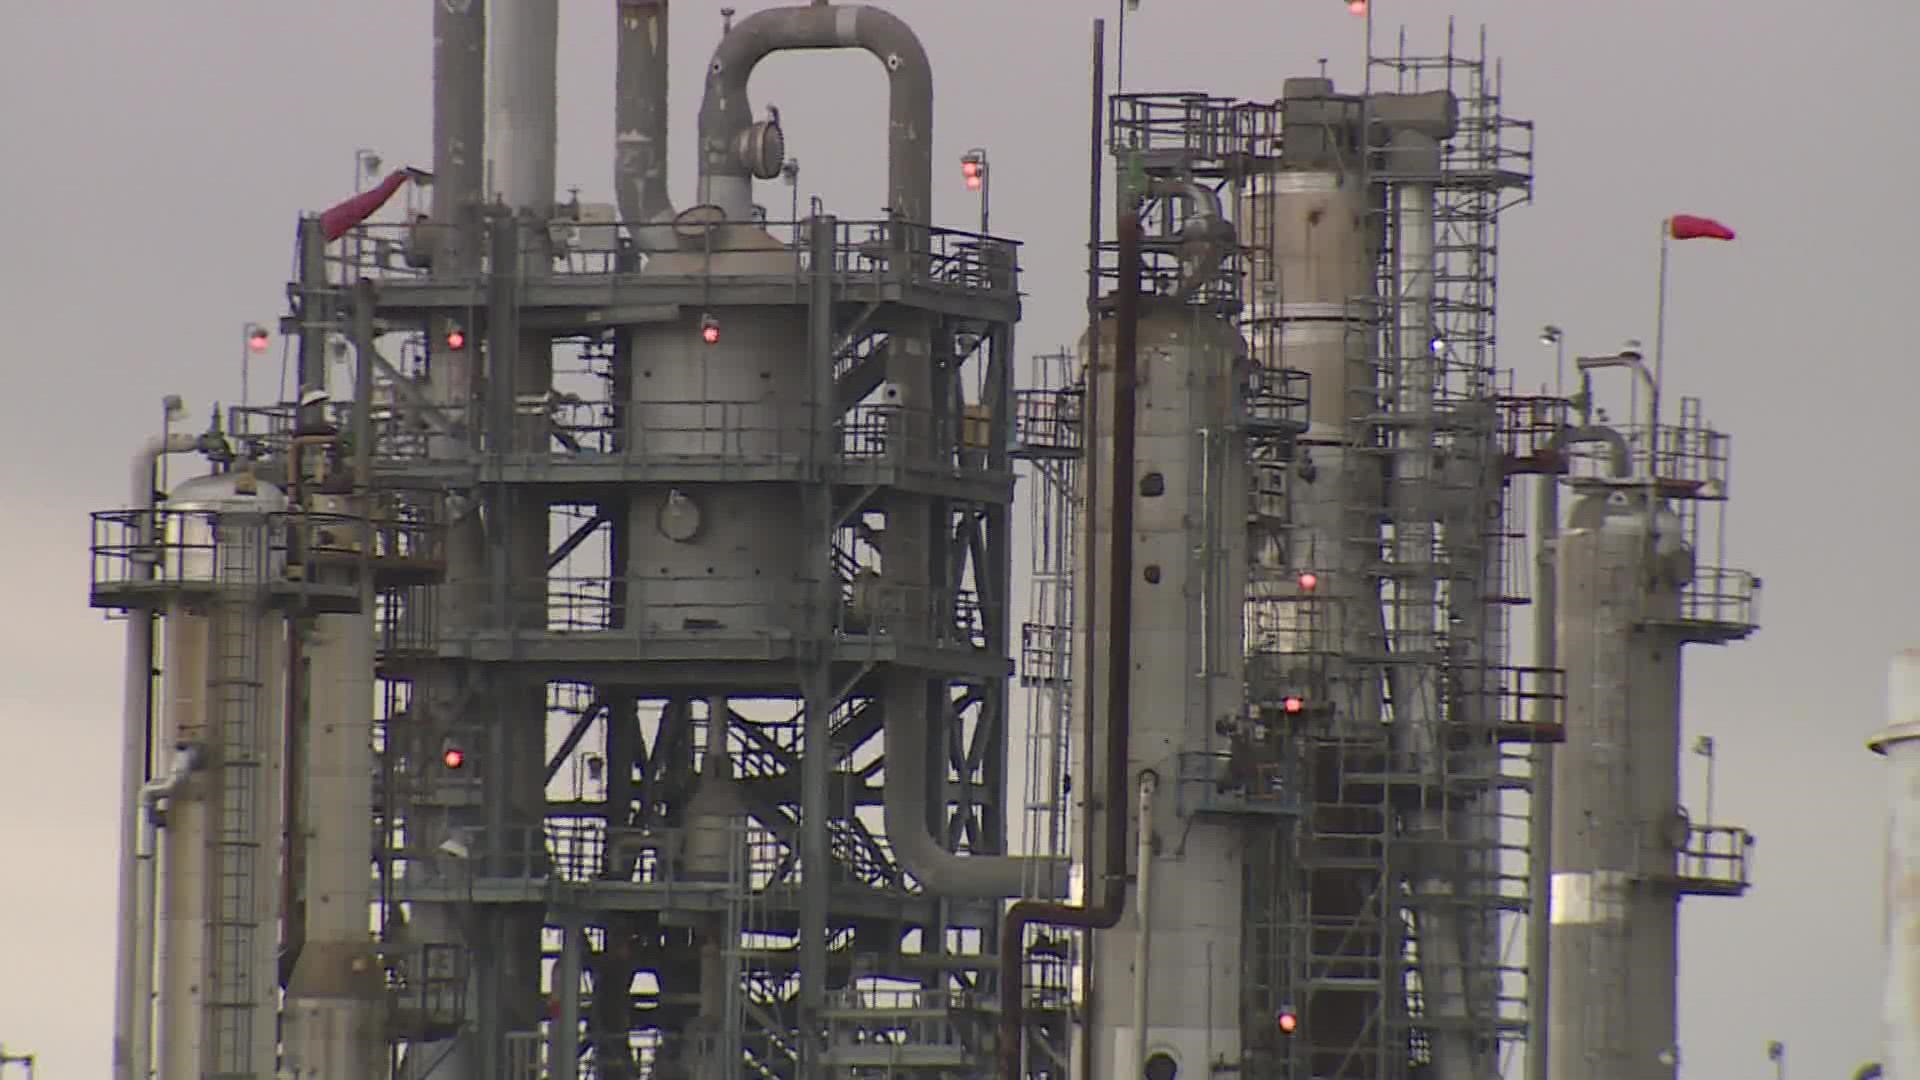 The Suncor refinery shutdown is believed to be playing a part in the recent price jumps but local economists do not think it's the only reason.